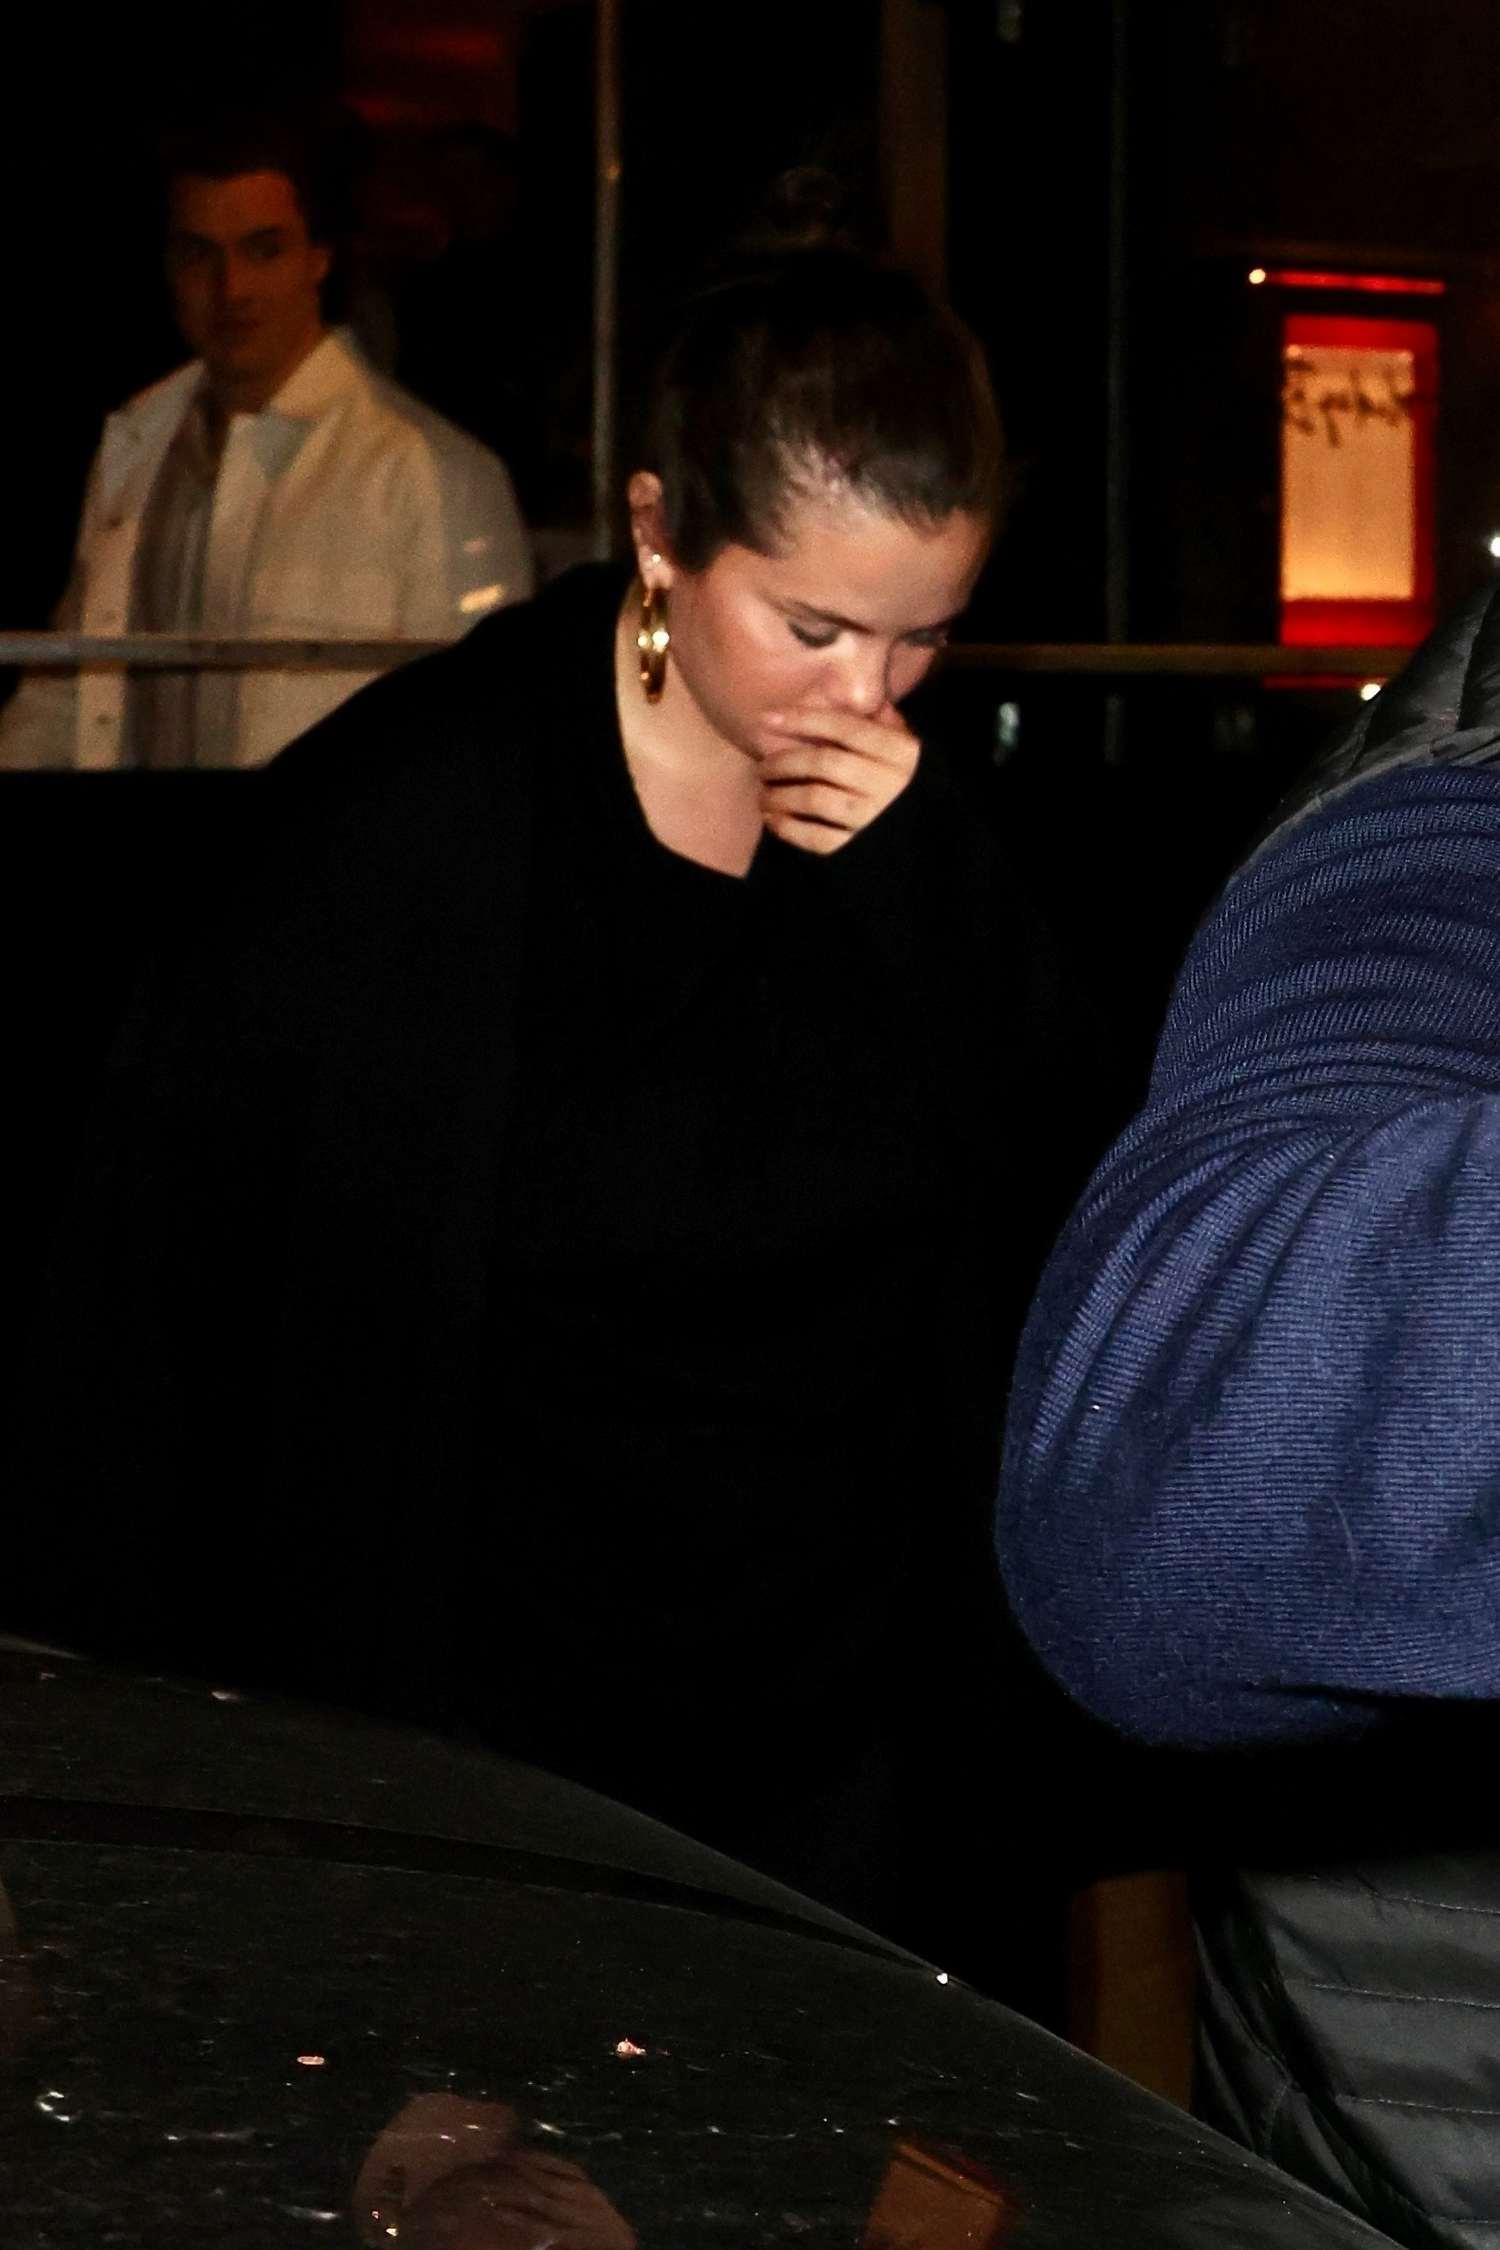 Selena_Gomez_-_goes_out_for_a_Valentine_s_Day_dinner_with_friends_at_The_Holiday_bar_in_New_York_City2C_0214202303.jpg